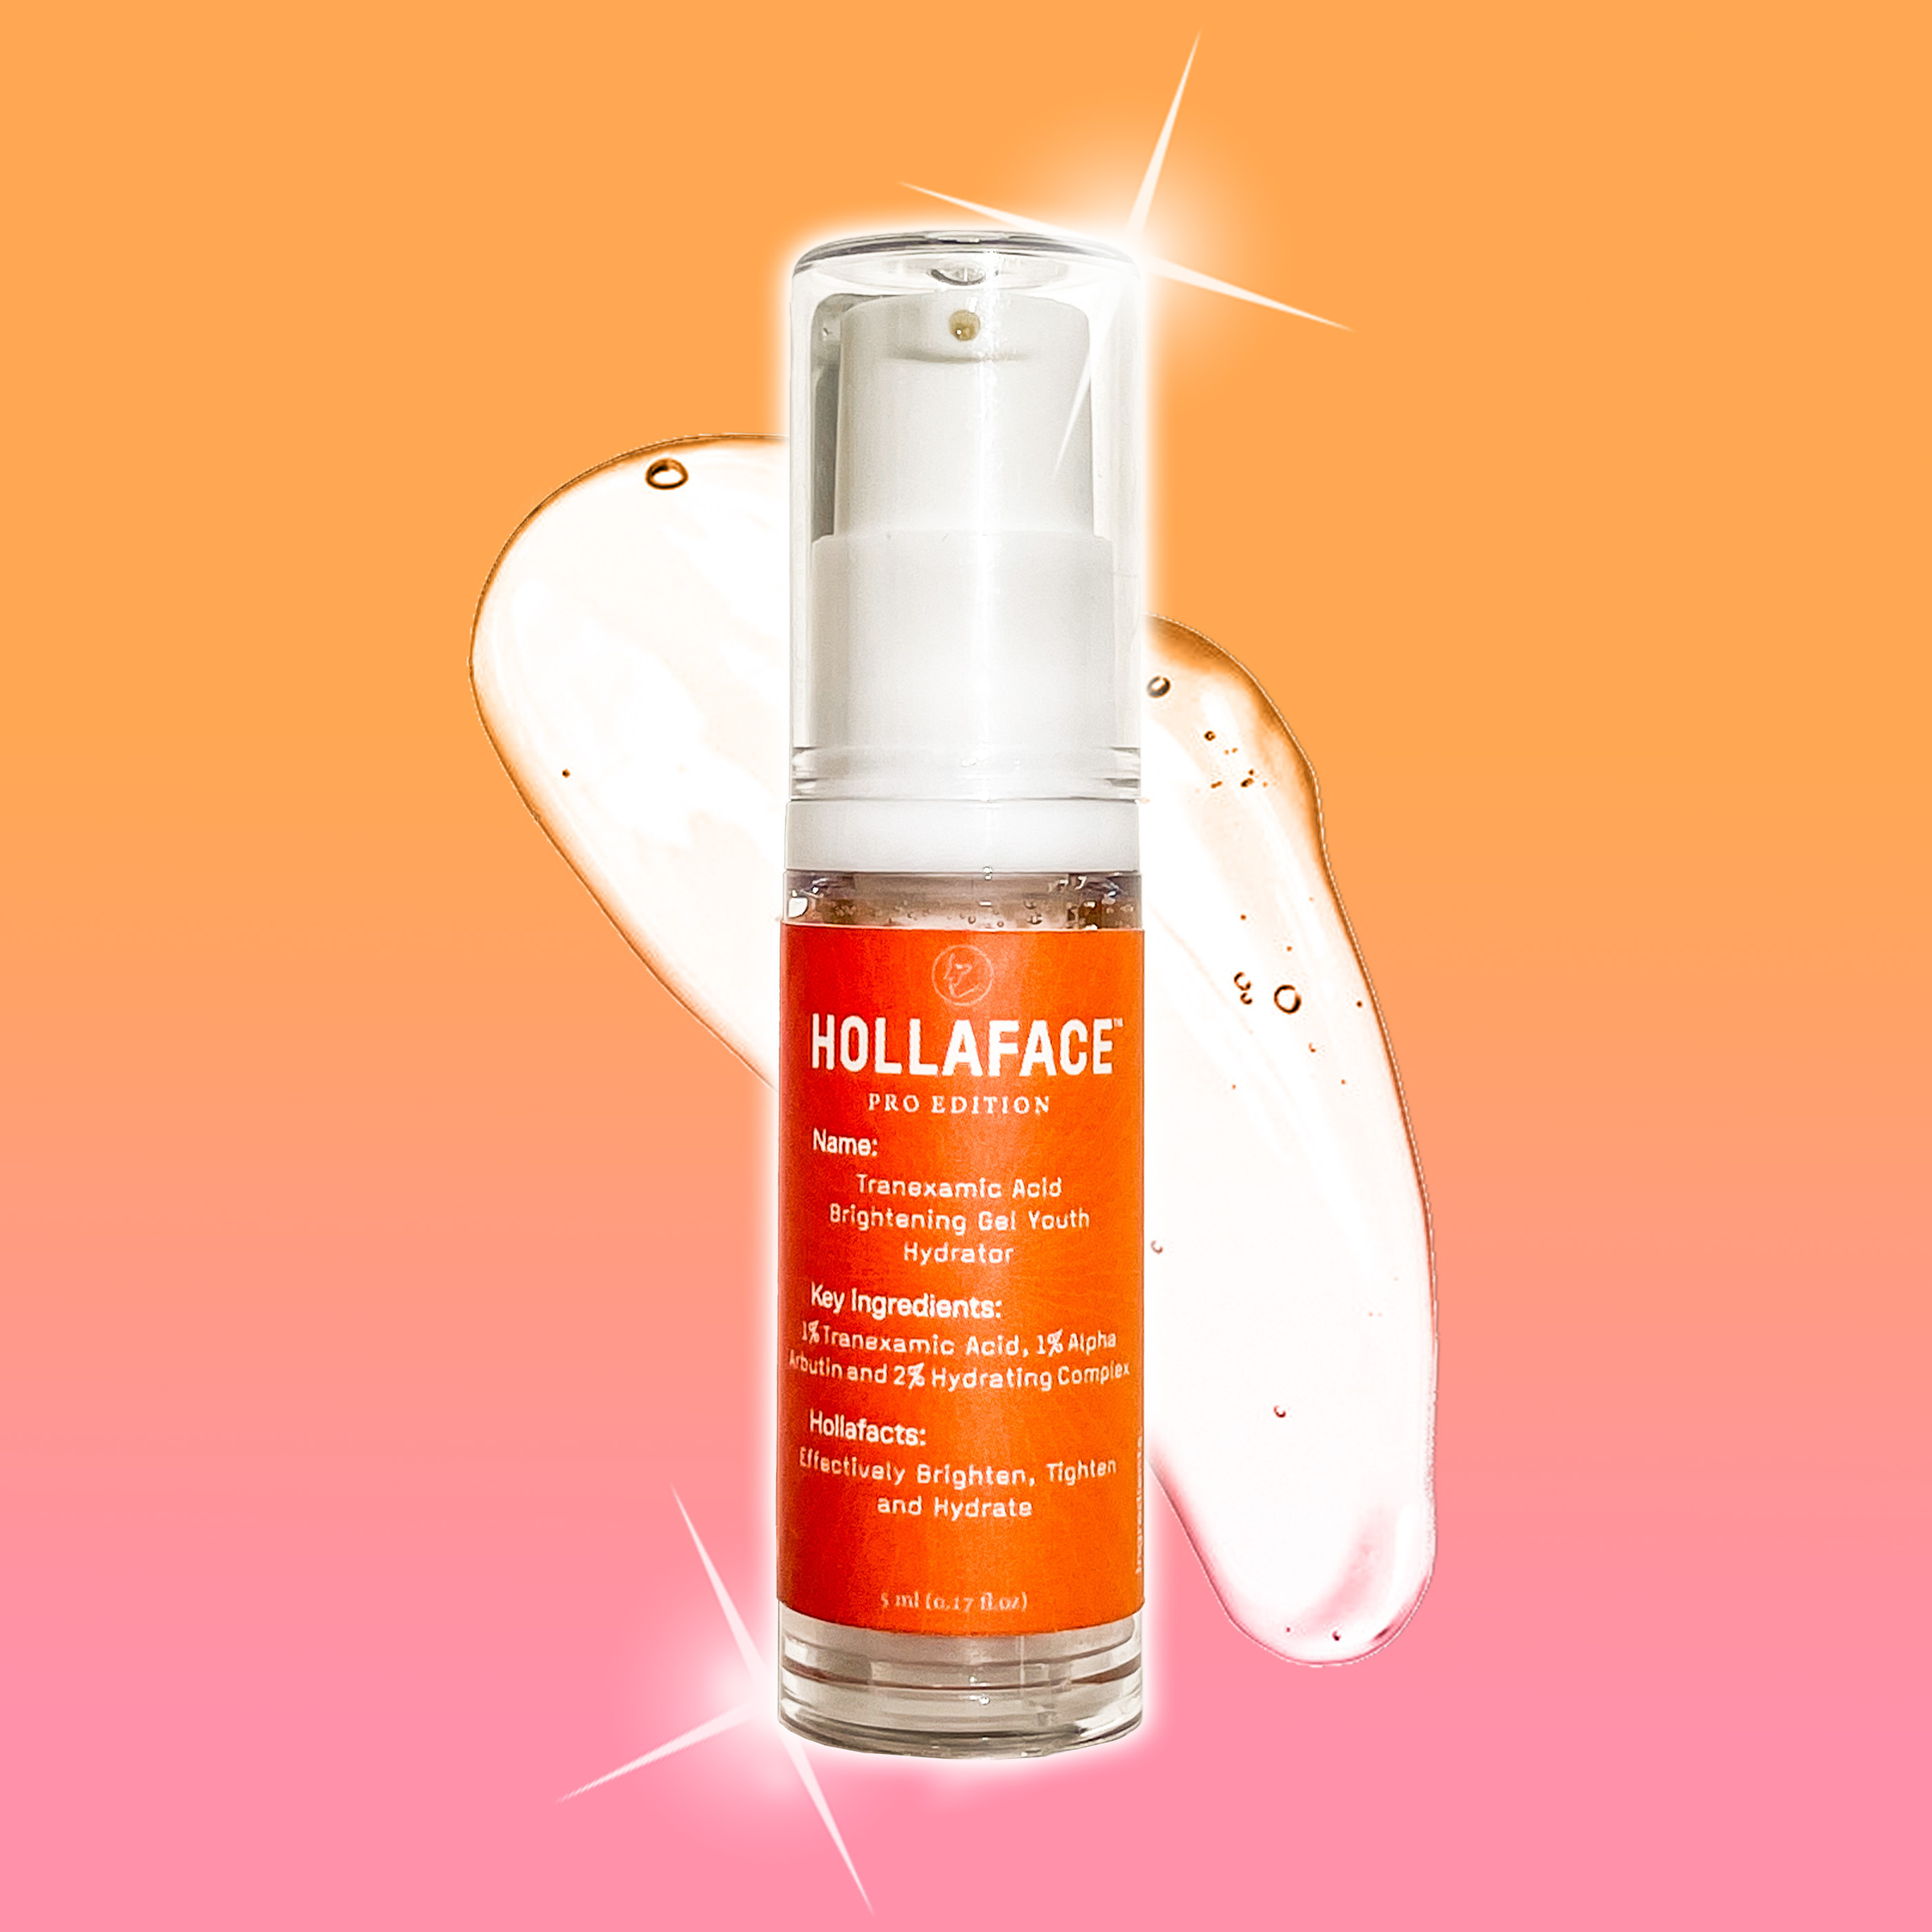 The Eye Gel You Never Knew You Needed. It's only RM15!